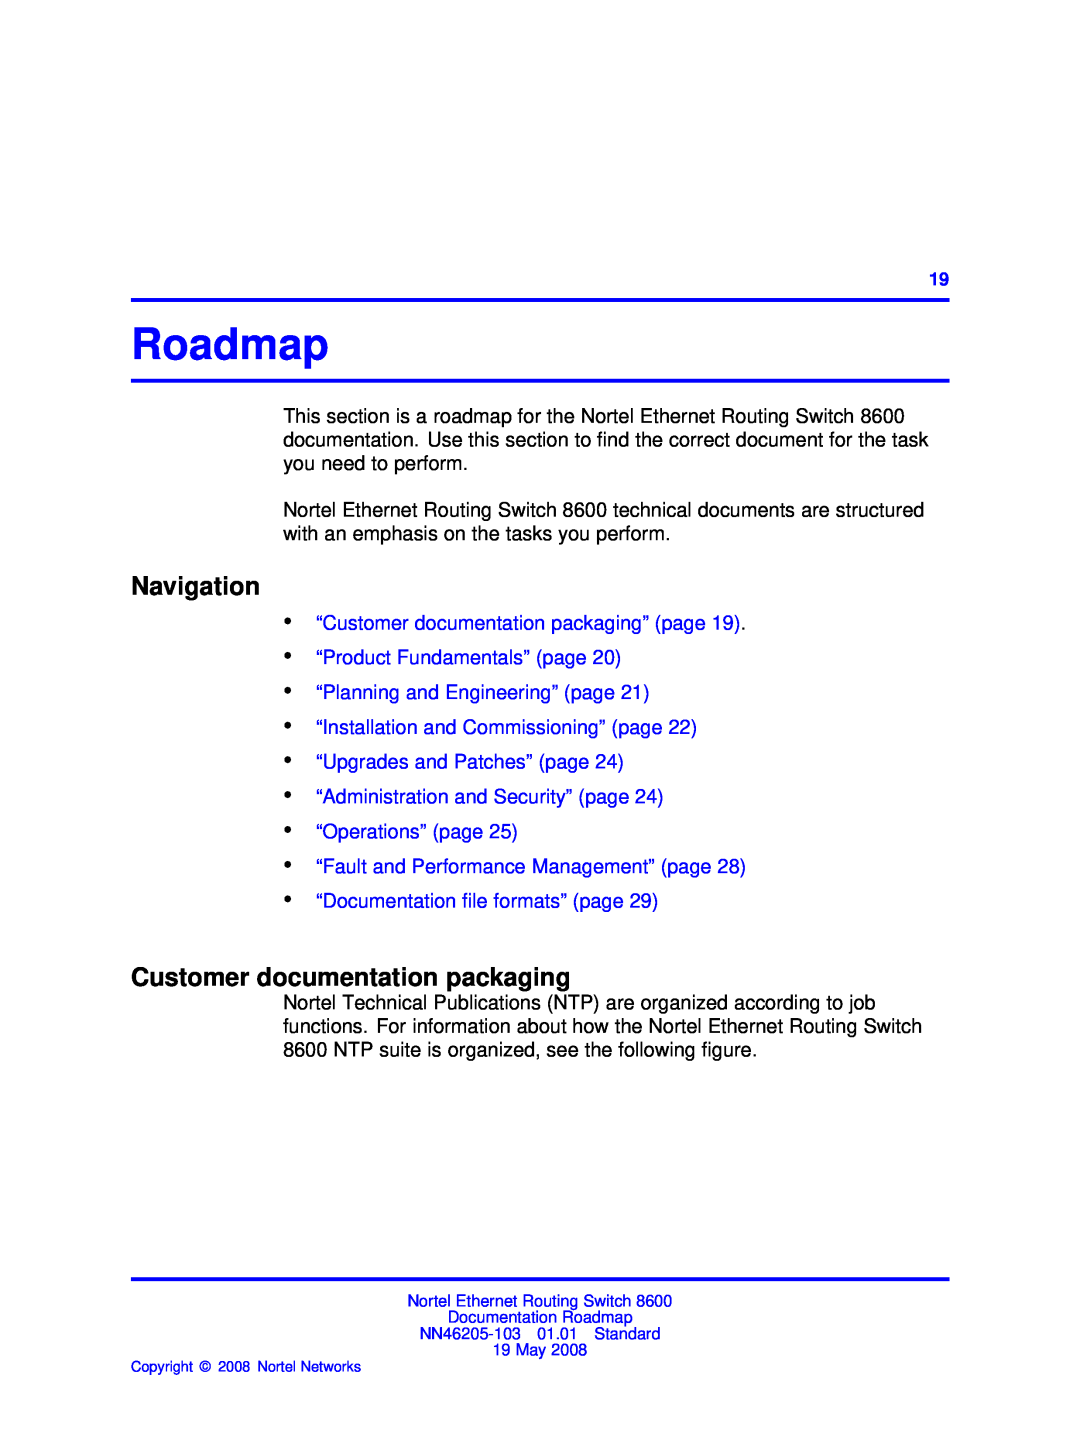 Nortel Networks 8600 Roadmap, Customer documentation packaging, “Operations” page “Fault and Performance Management” page 